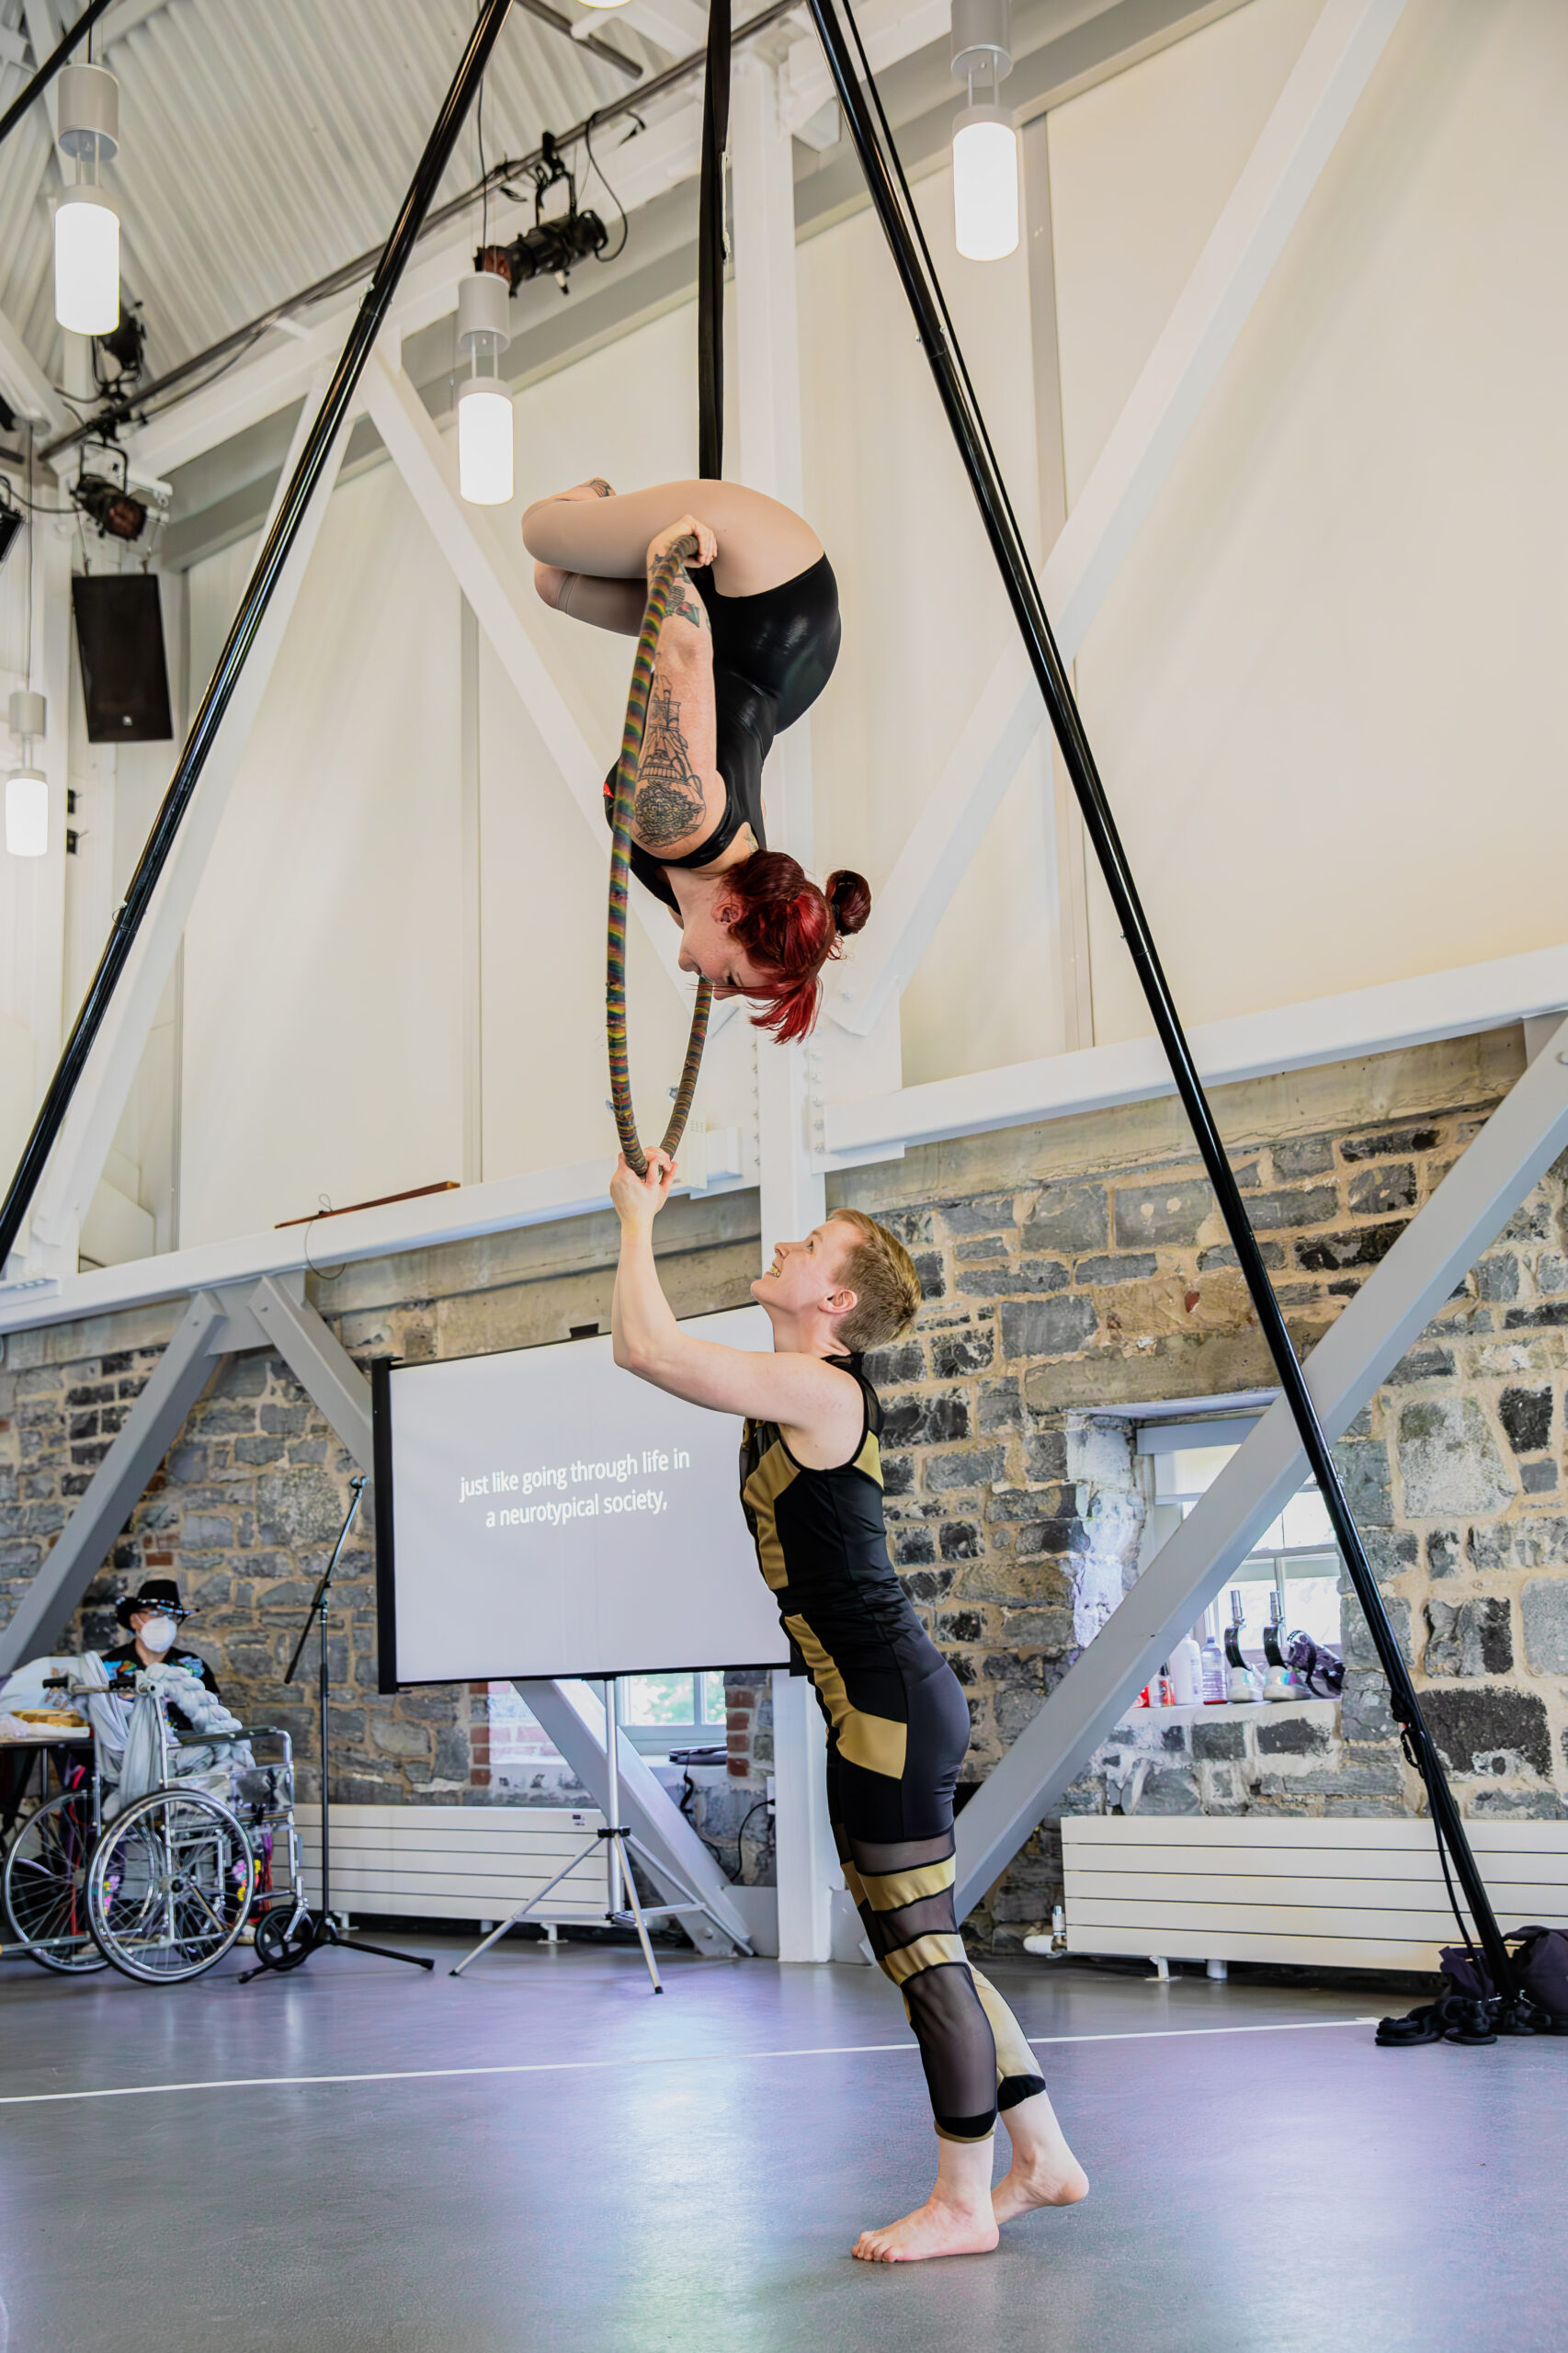 A photo of Erin and Maxime during an aerial hoop performance. Erin is a white queer Disabled (double below knee amputee and neuro non-conforming) human with fiery red hair styled with bangs and two buns. Maxime is a white joyful trans and non-binary person with short ginger hair. Erin hangs upside-down from the top of the hoop, with zir body folded over it and both hands holding the hoop. Maxime stands on the ground, with both hands on the bottom of the hoop. Erin and Maxime look at each other joyfully.